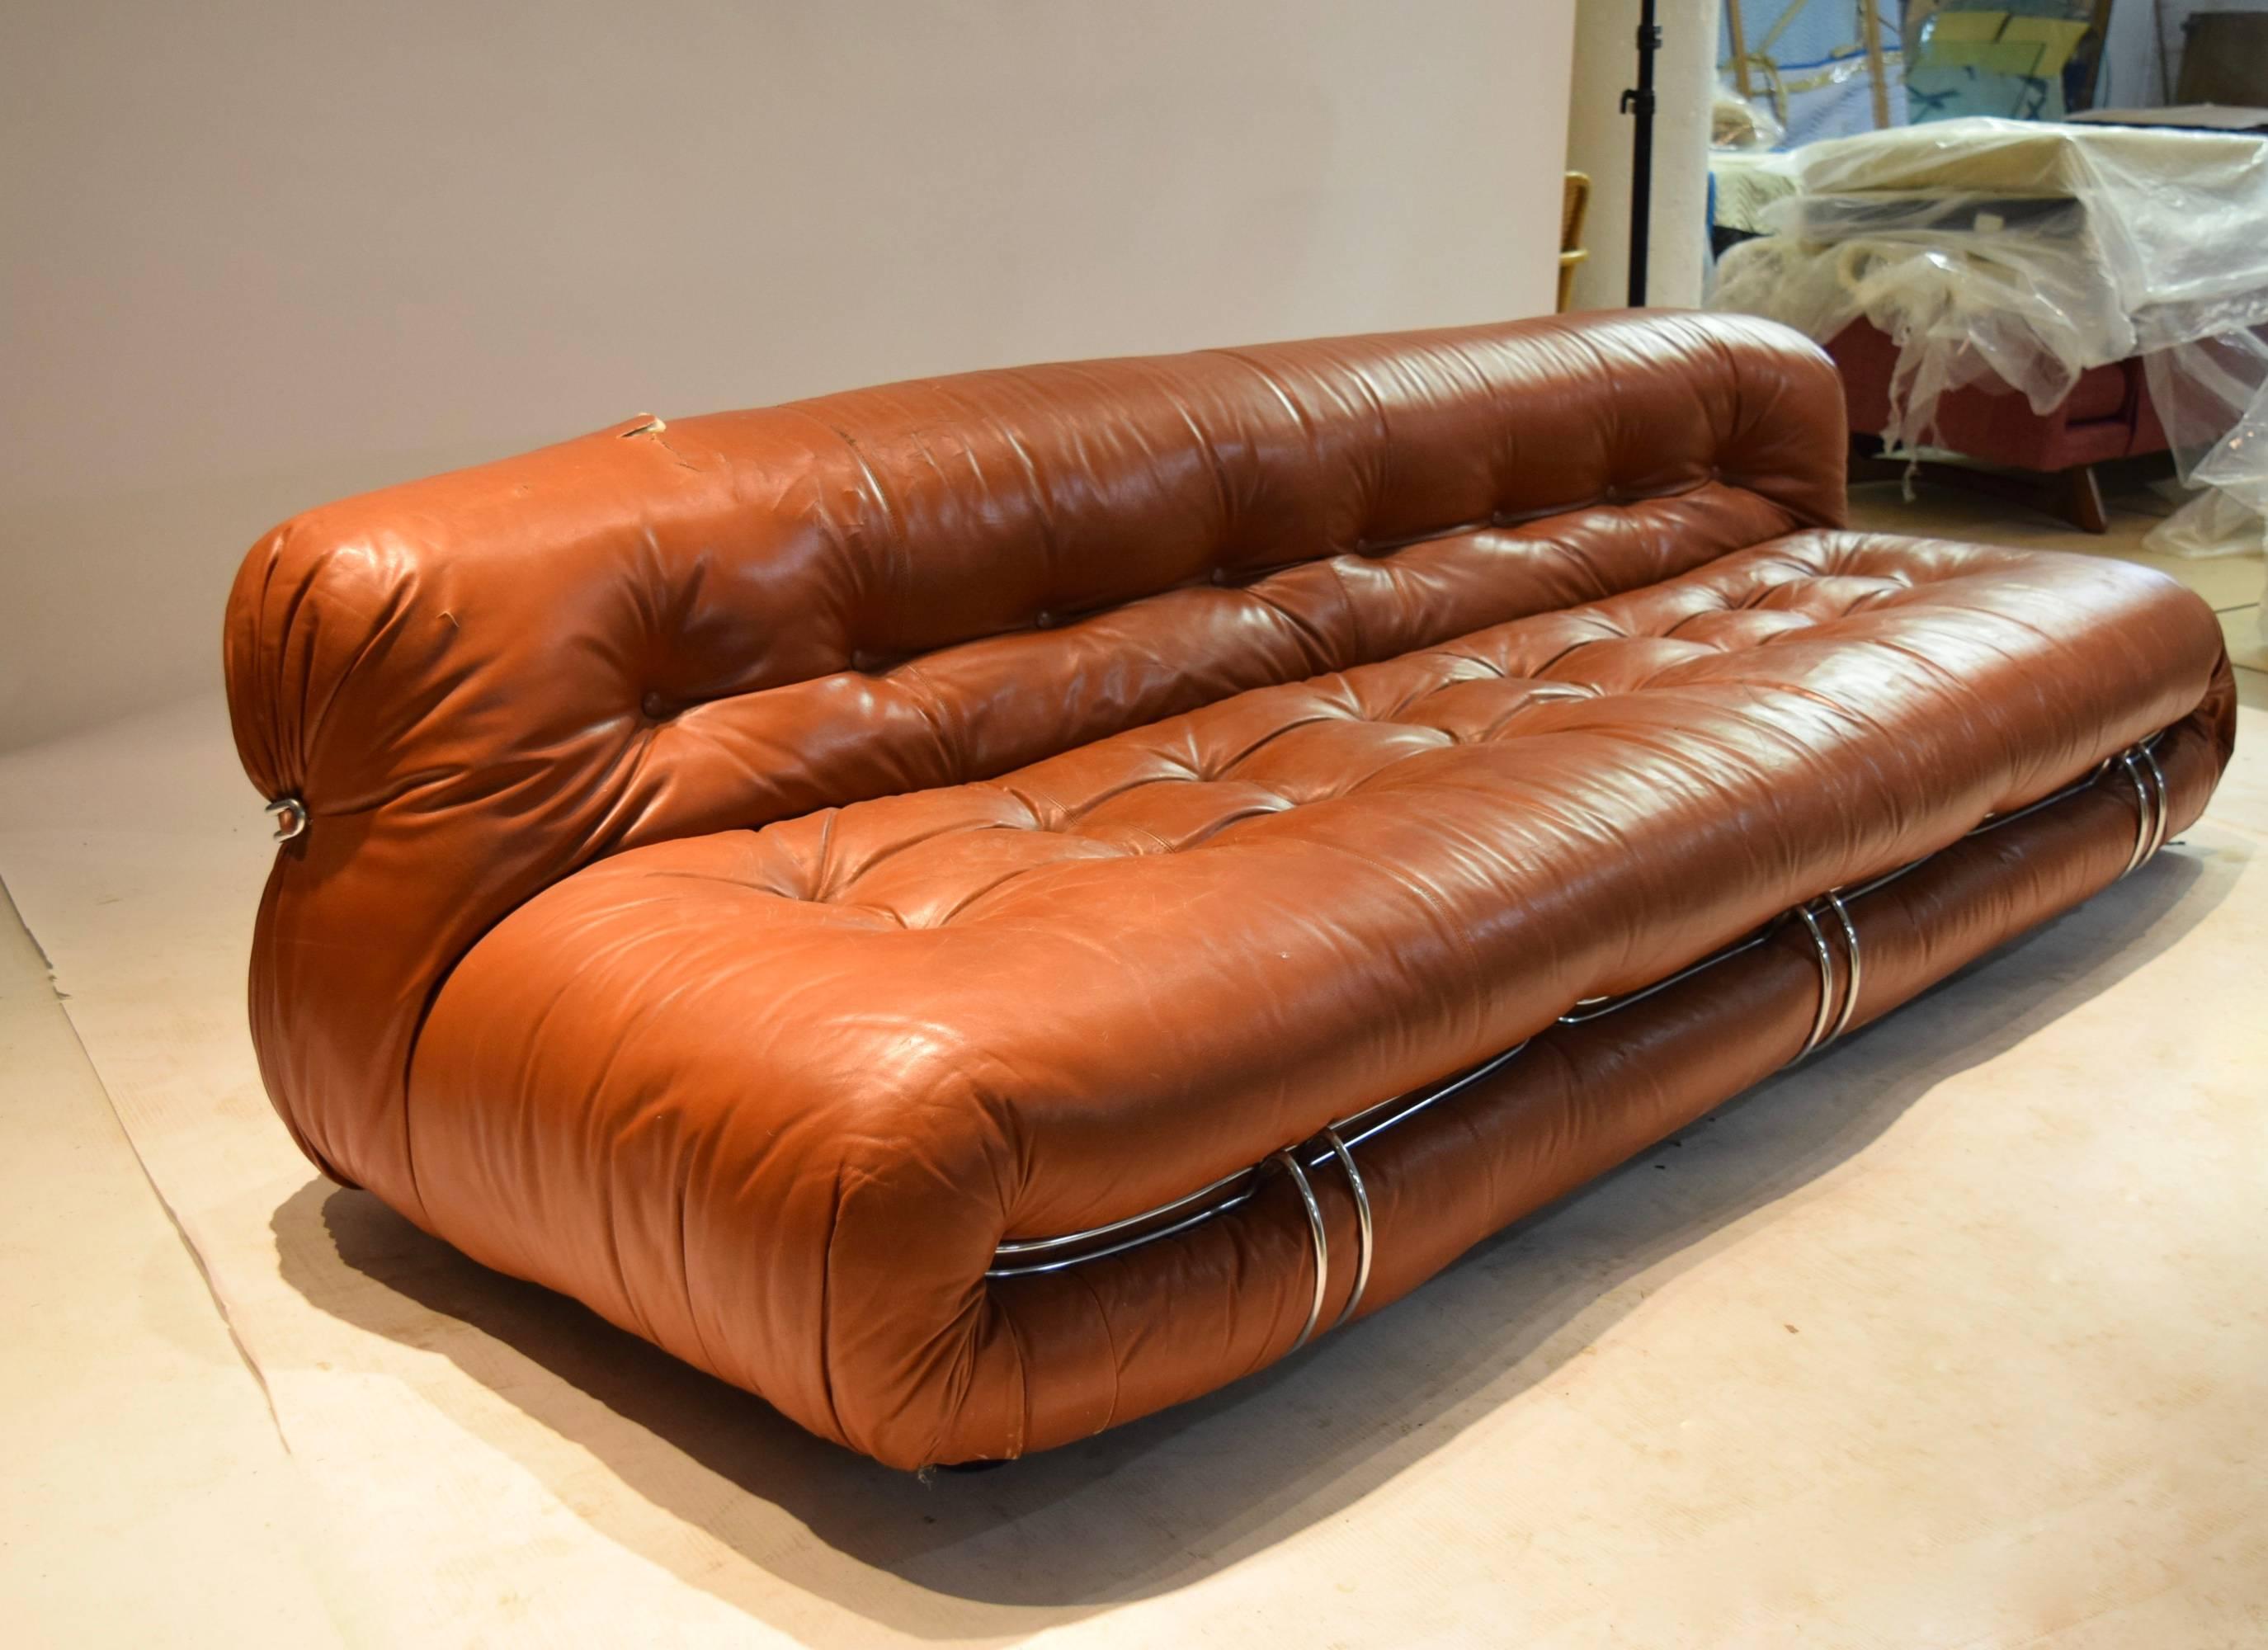 Three-seat vintage Soriana sofa in original brown leather needs to be upholstered. Buyer can supply leather to have sofa upholstered for an additional $2400.
Buyer supplies leather
Upholstery guaranteed.